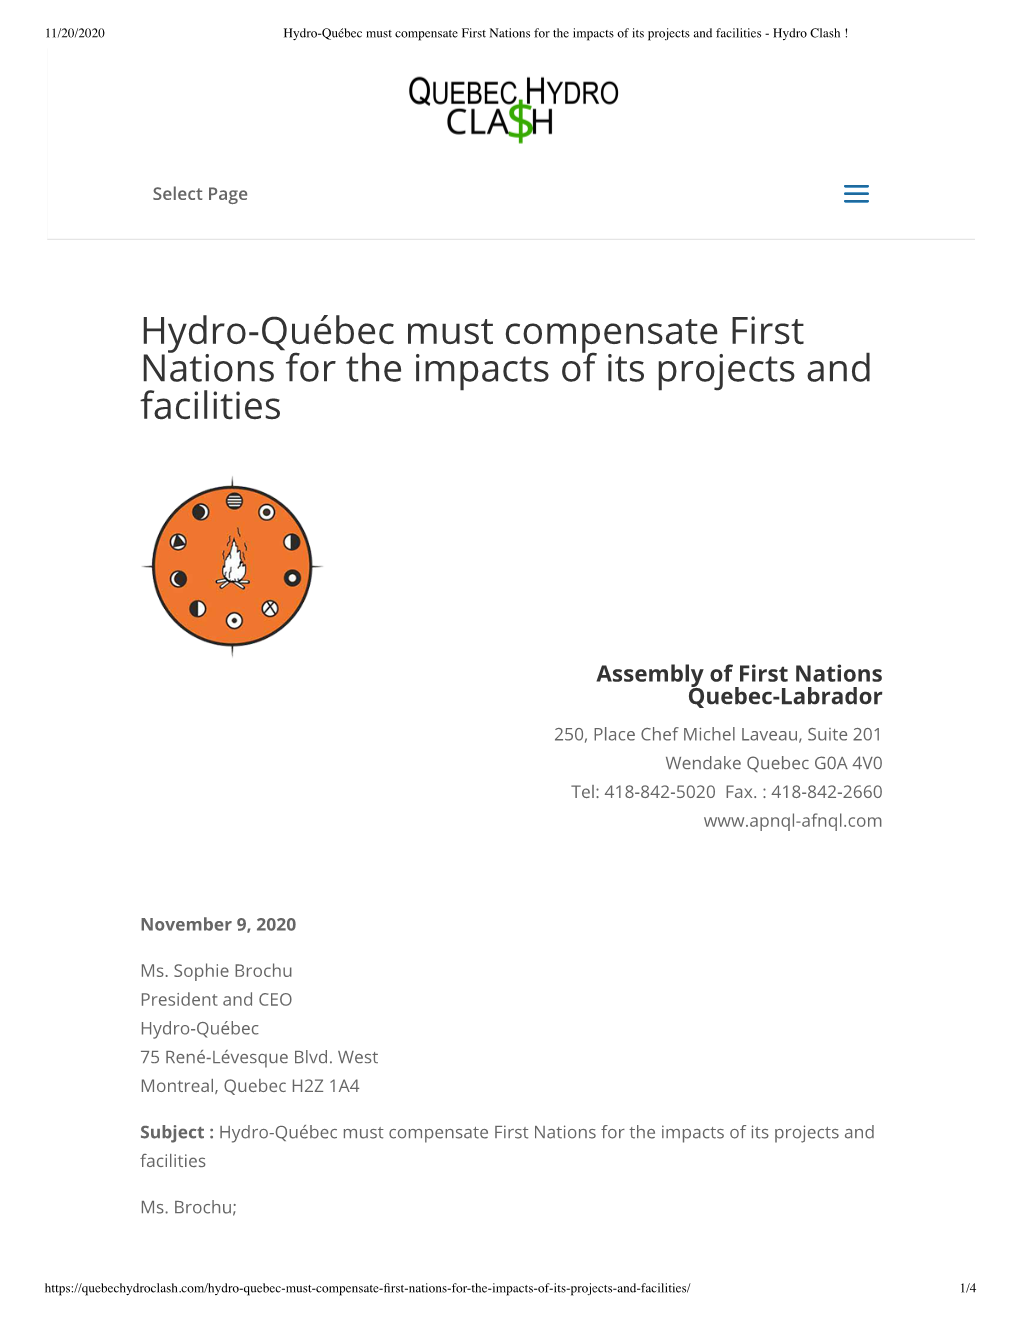 Hydro-Québec Must Compensate First Nations for the Impacts of Its Projects and Facilities - Hydro Clash !